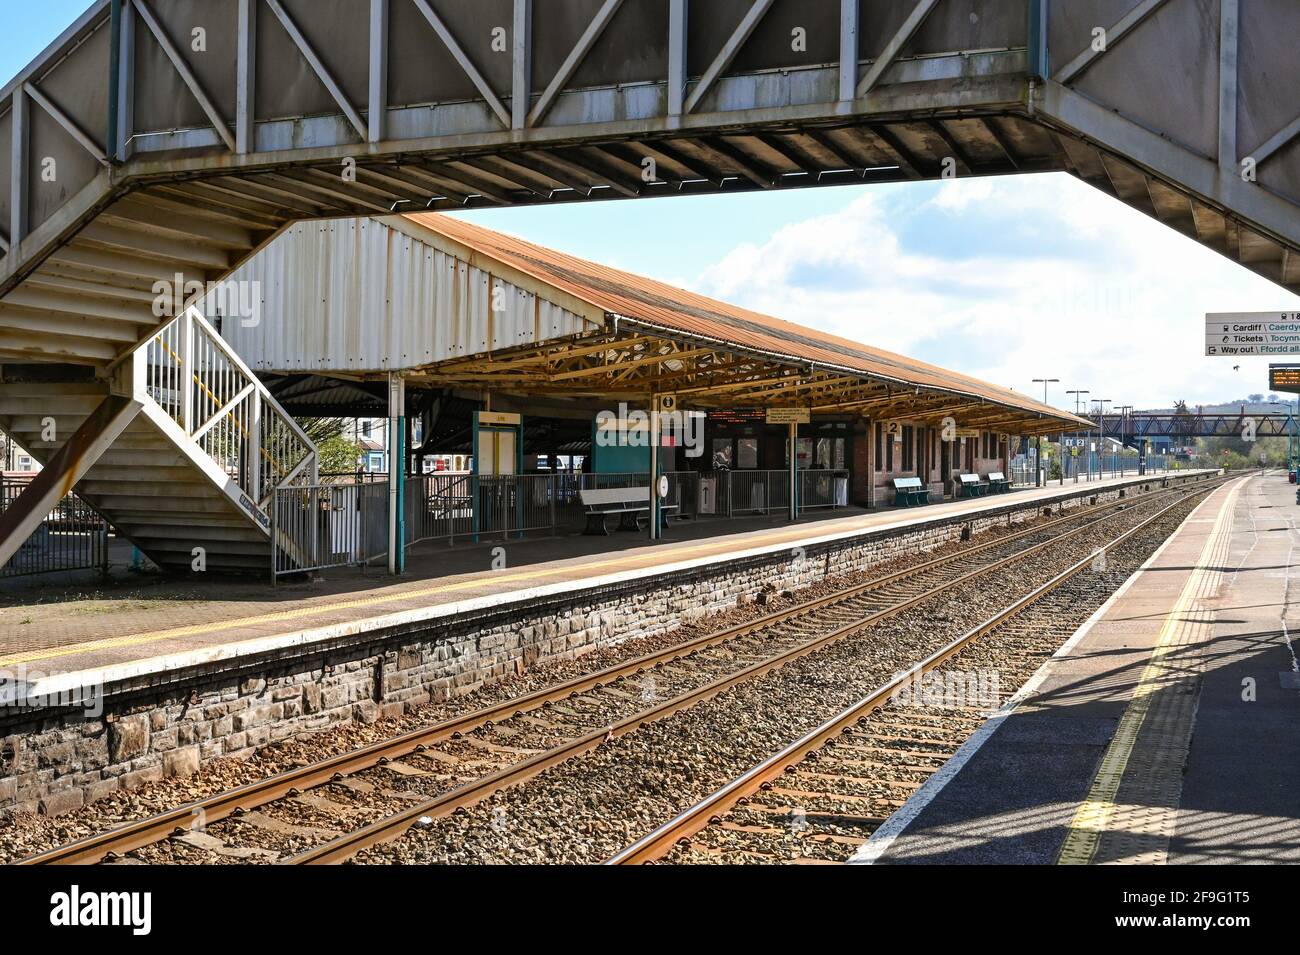 Caerphilly, Wales - April 2021: Platforms at Caerphilly railway station with footbridge framing the view. Stock Photo